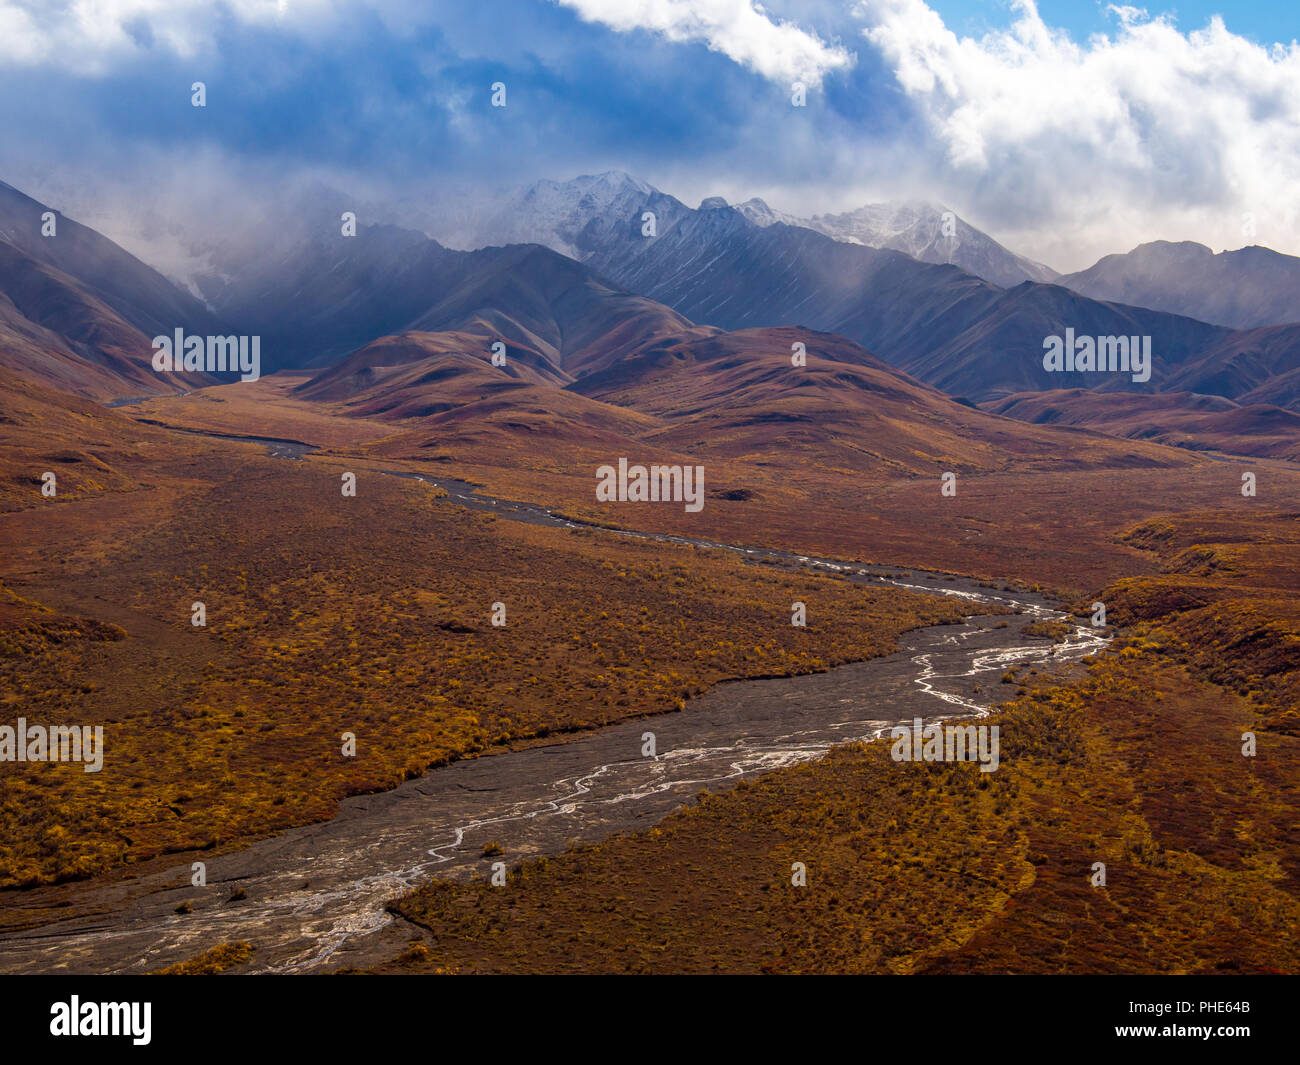 Braided River Flowing From Mountain Range Shrouded in Clouds, Denali National Park, Alaska Stock Photo